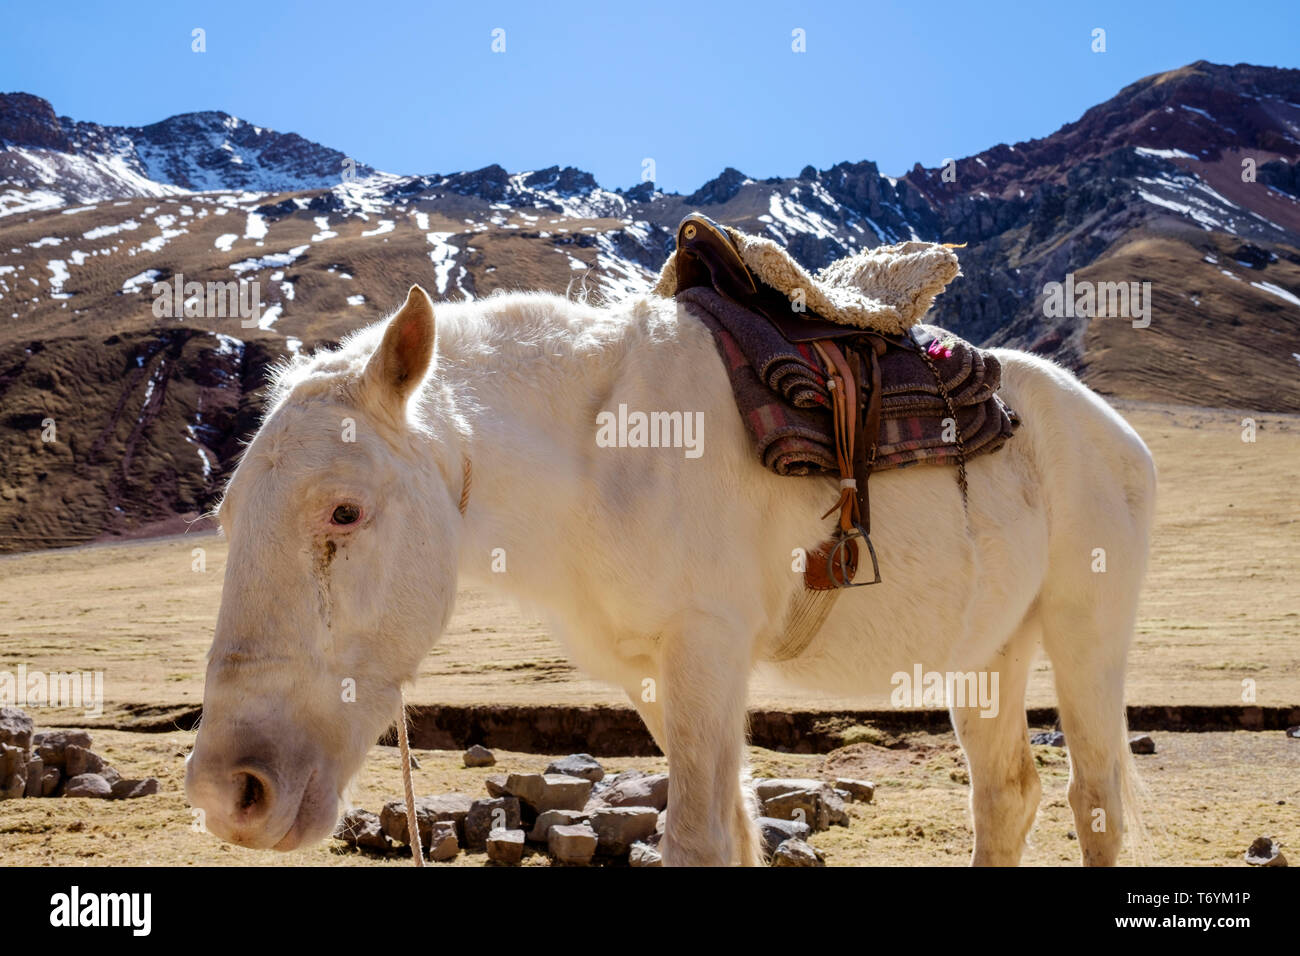 White horse for rent on the way to the Rainbow Mountain in Los Andes, Peru Stock Photo